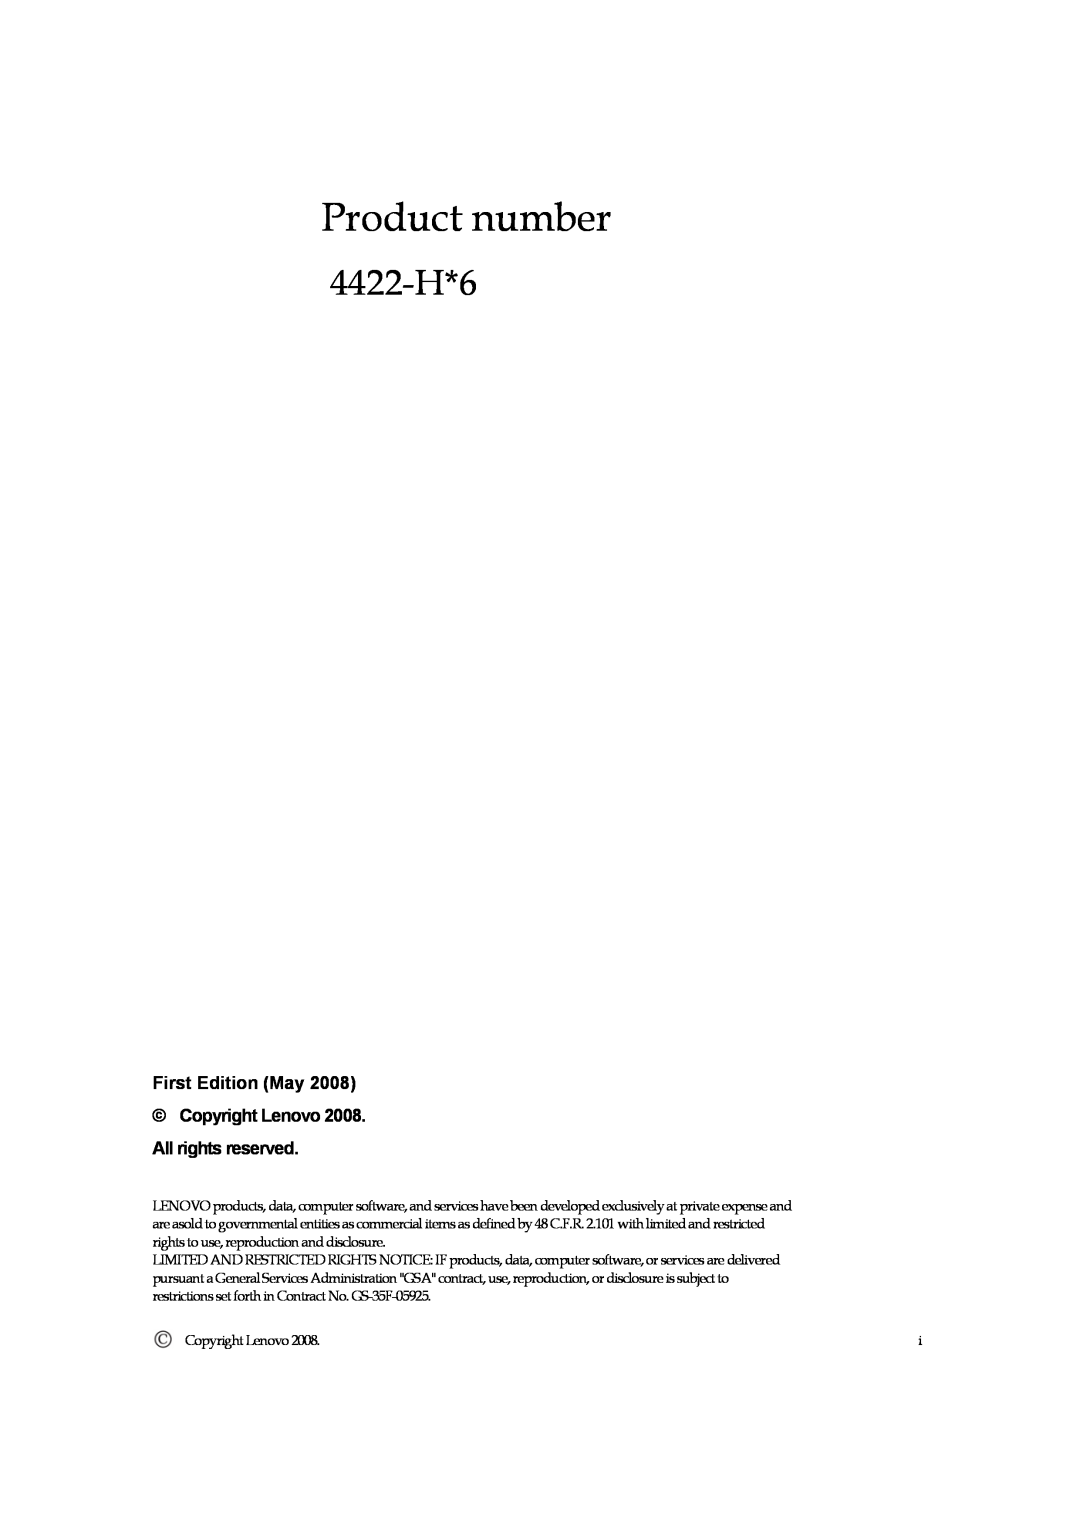 Lenovo L2240p manual Product number, 4422-H*6 